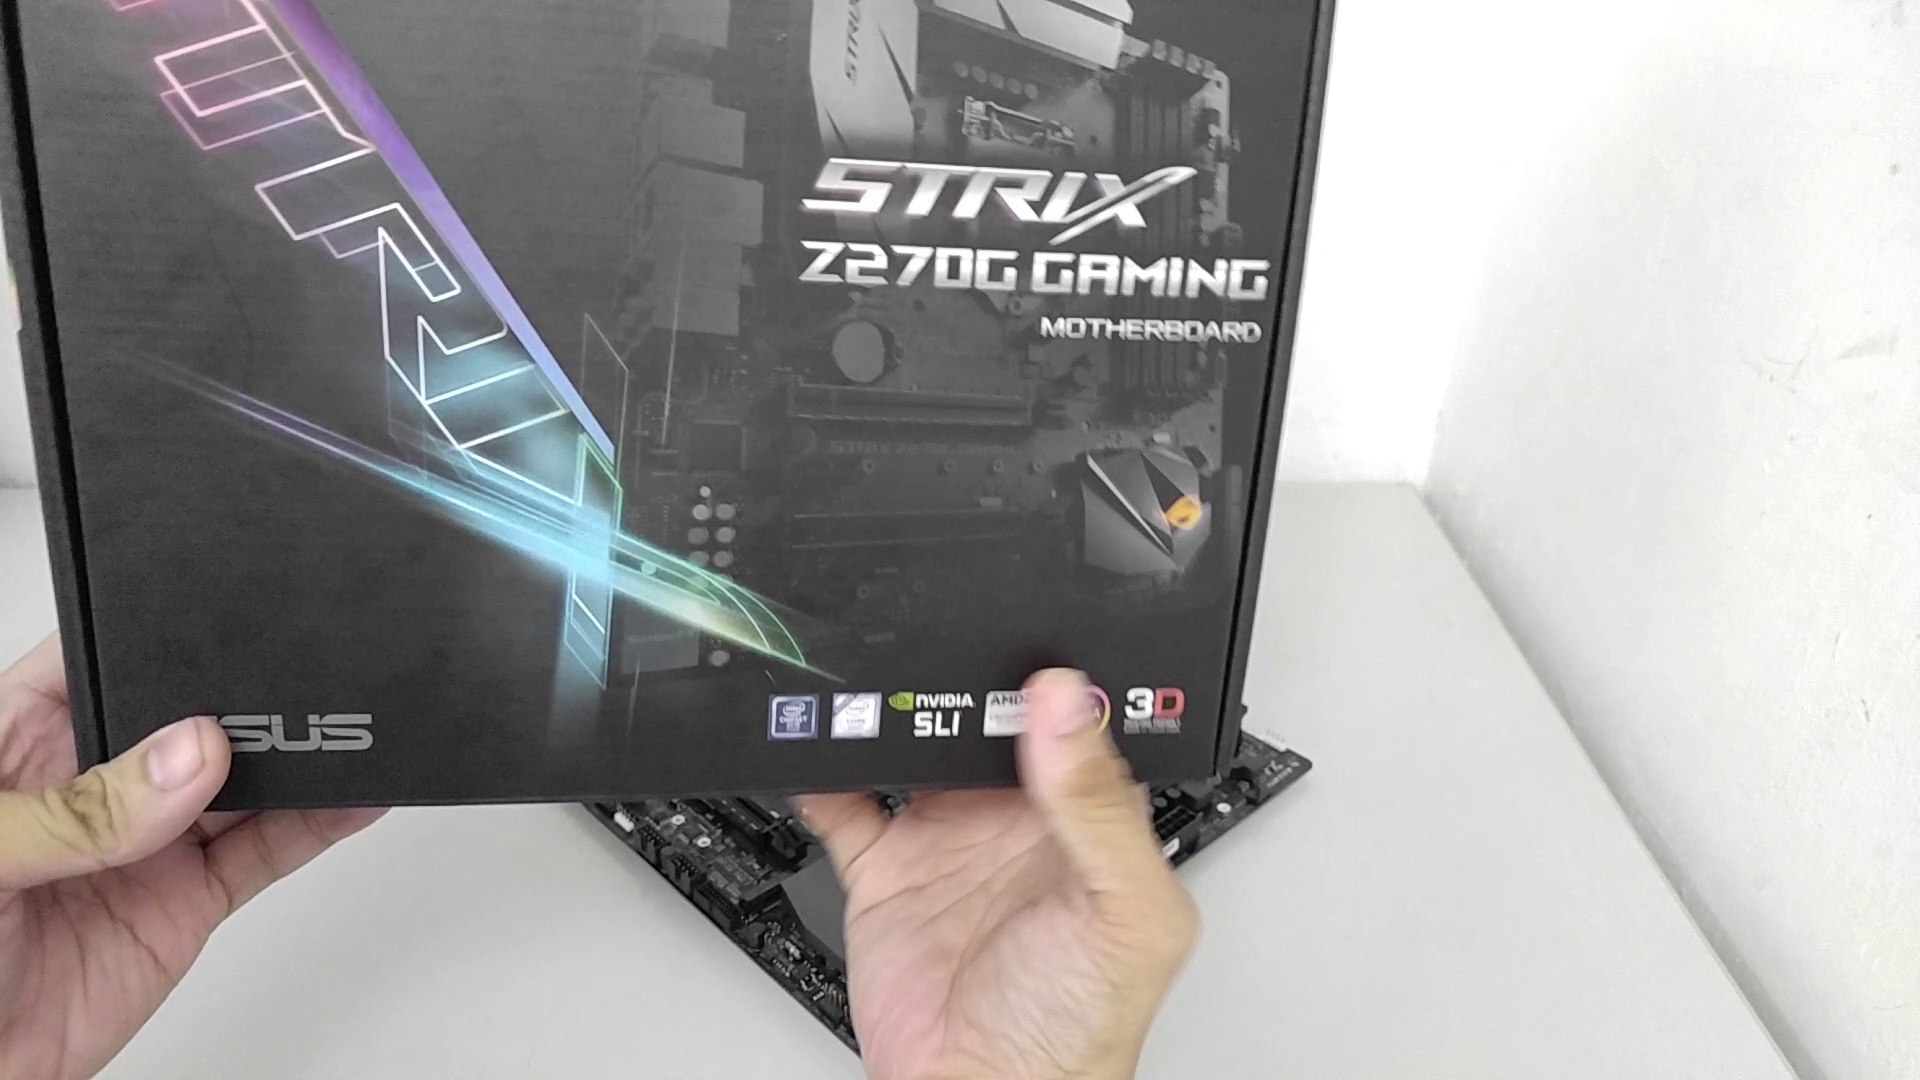 ASUS ROG Strix Z270G GAMING Motherboard Unboxing and Overview - video  Dailymotion